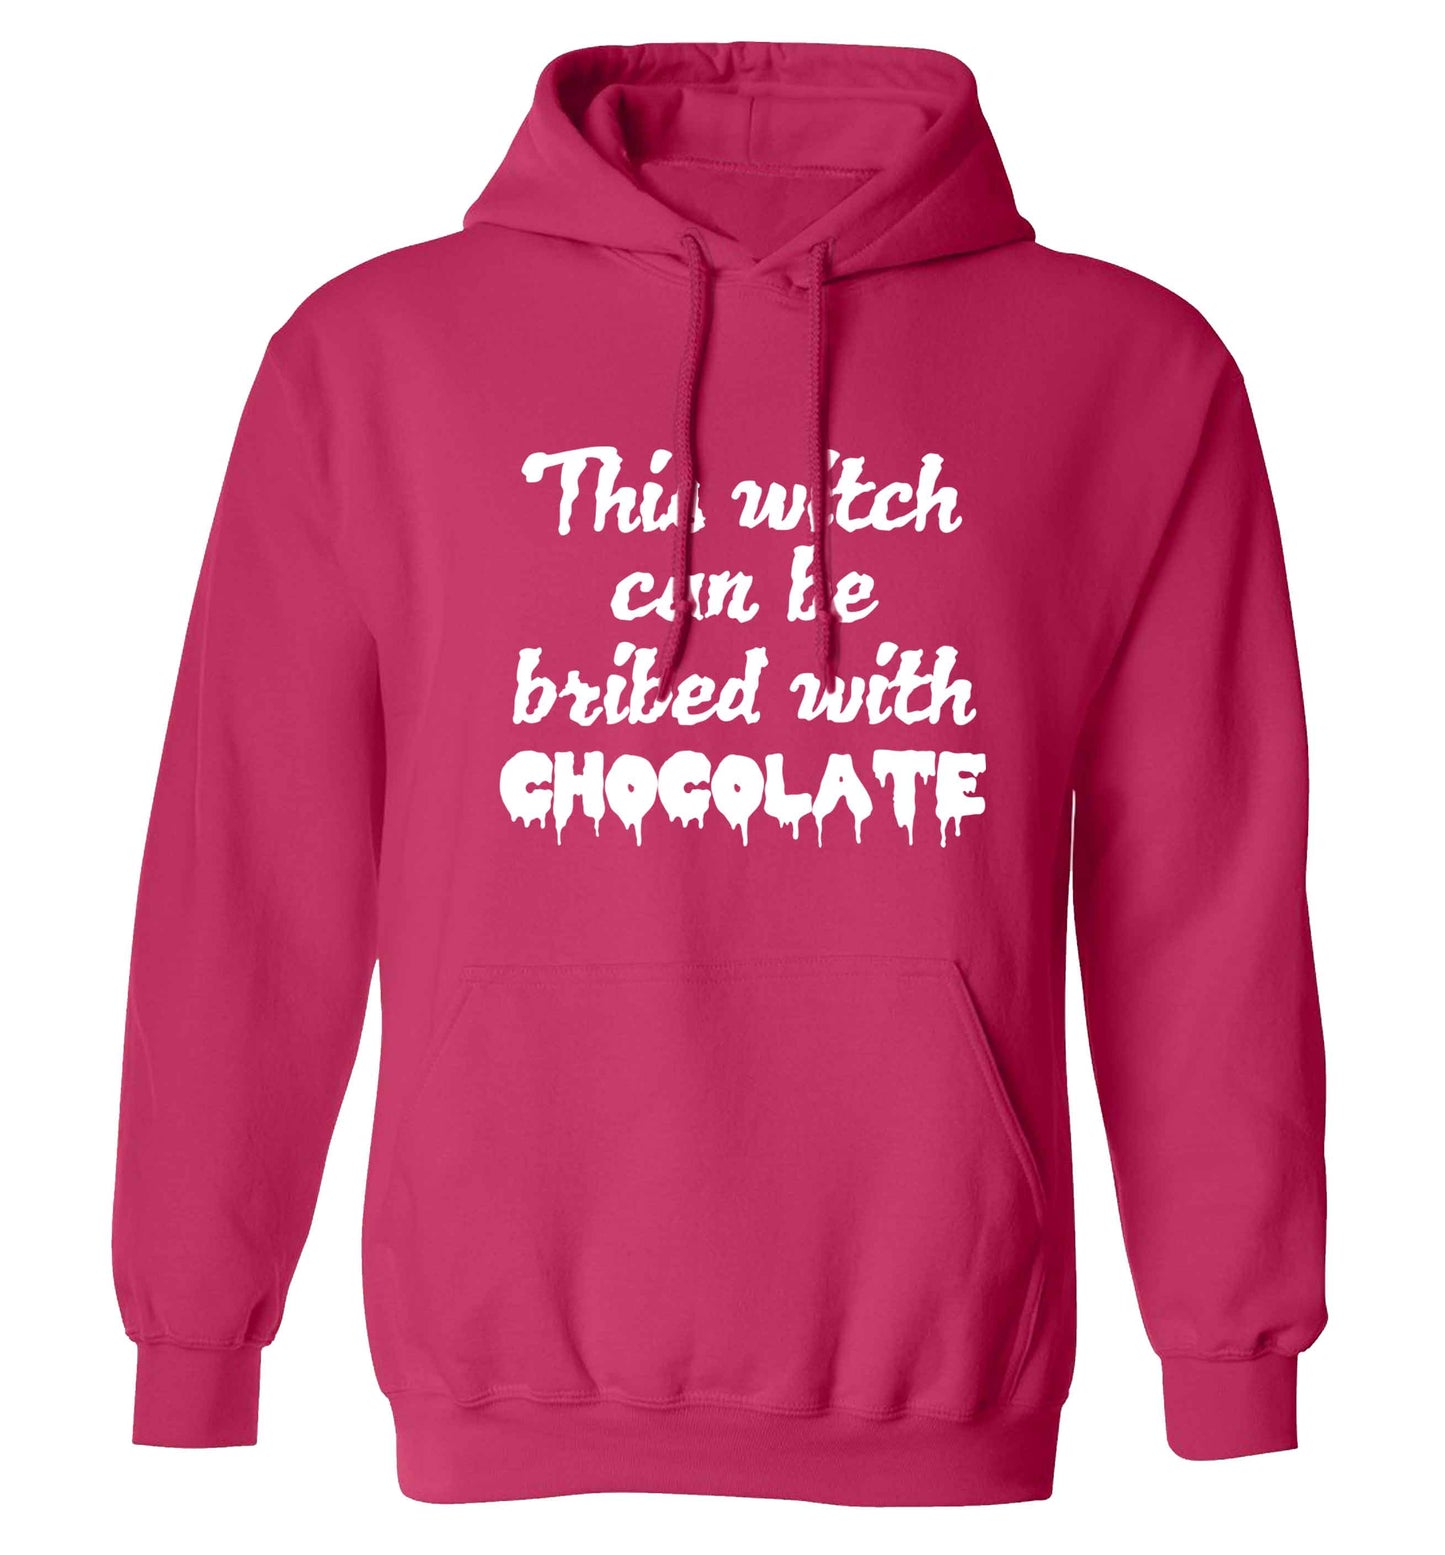 This witch can be bribed with chocolate adults unisex pink hoodie 2XL